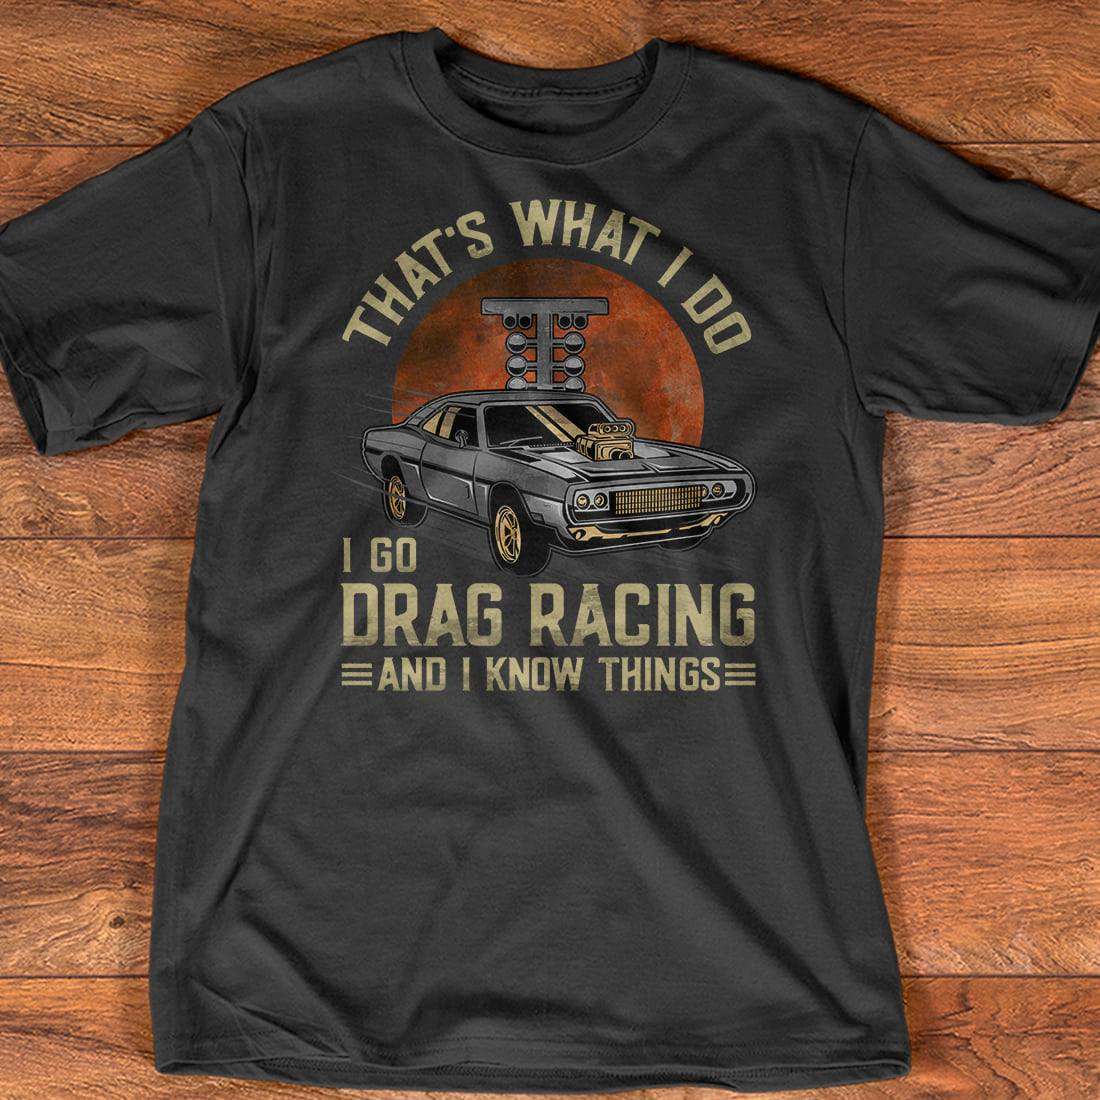 That's what I do I go drag racing and I know things - Drag racing